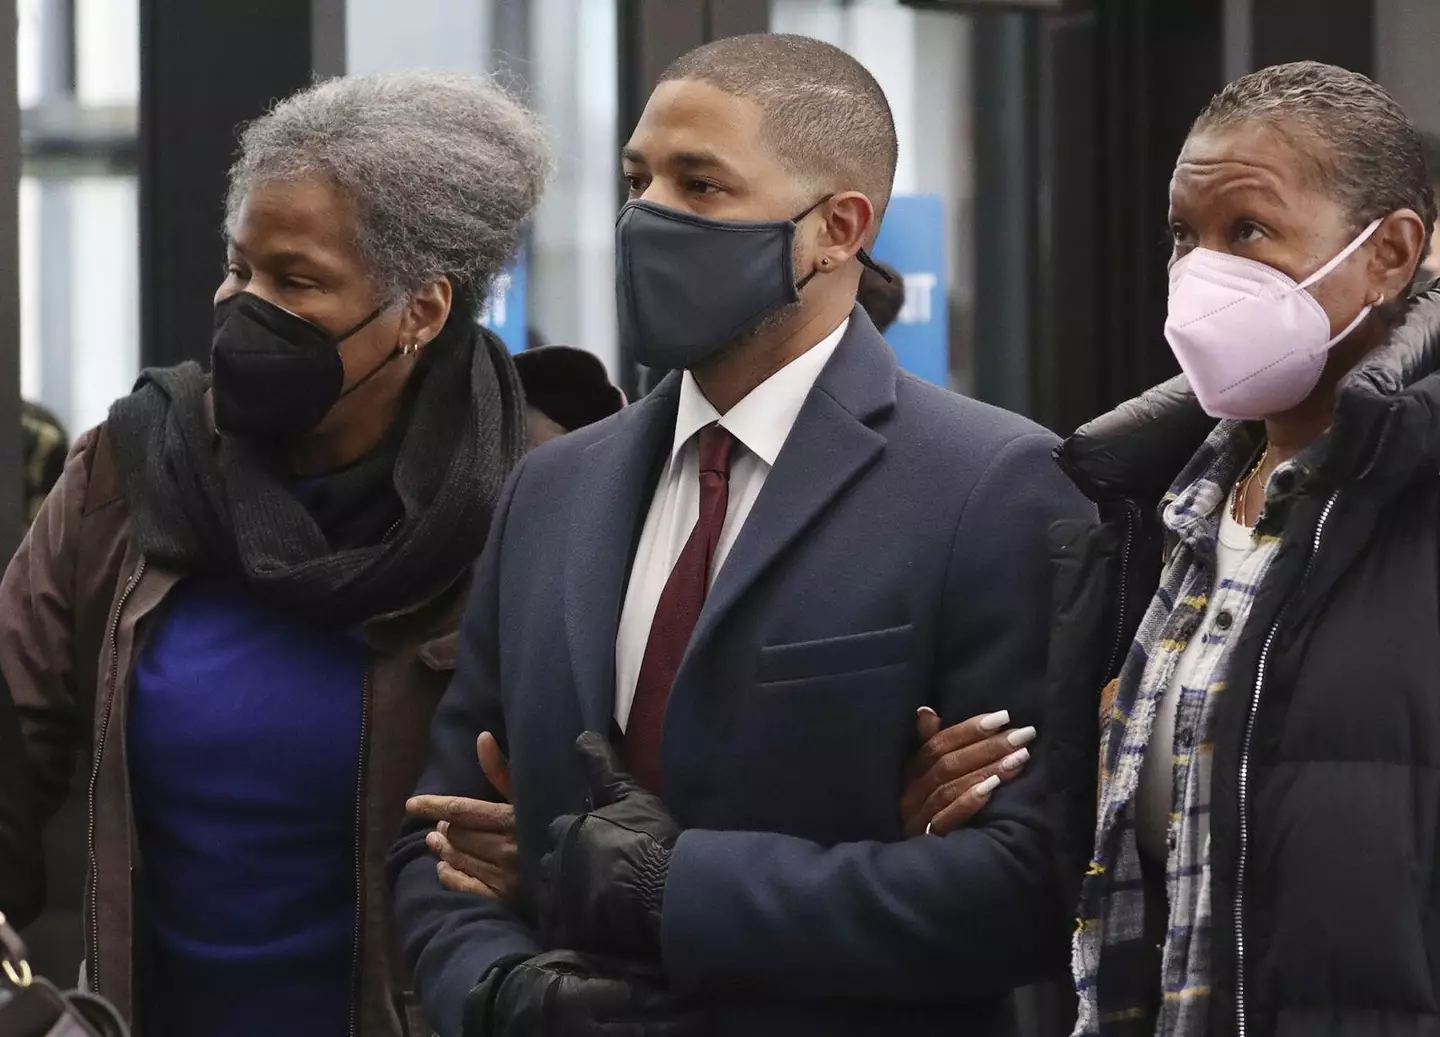 Smollett arriving at the court.